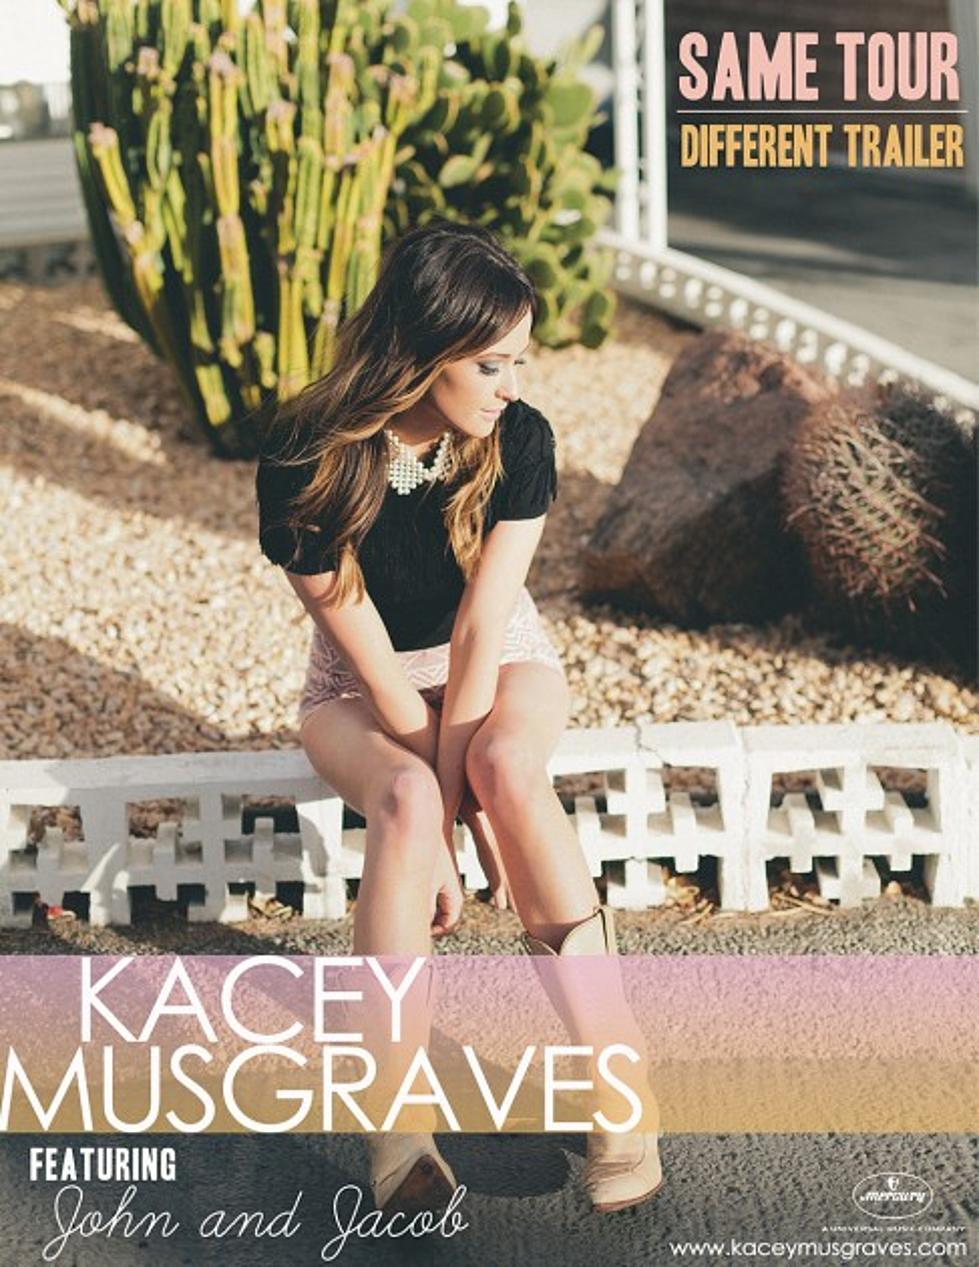 Kacey Musgraves To Perform As Part Of MVCC Cultural Series March 29th, 2015